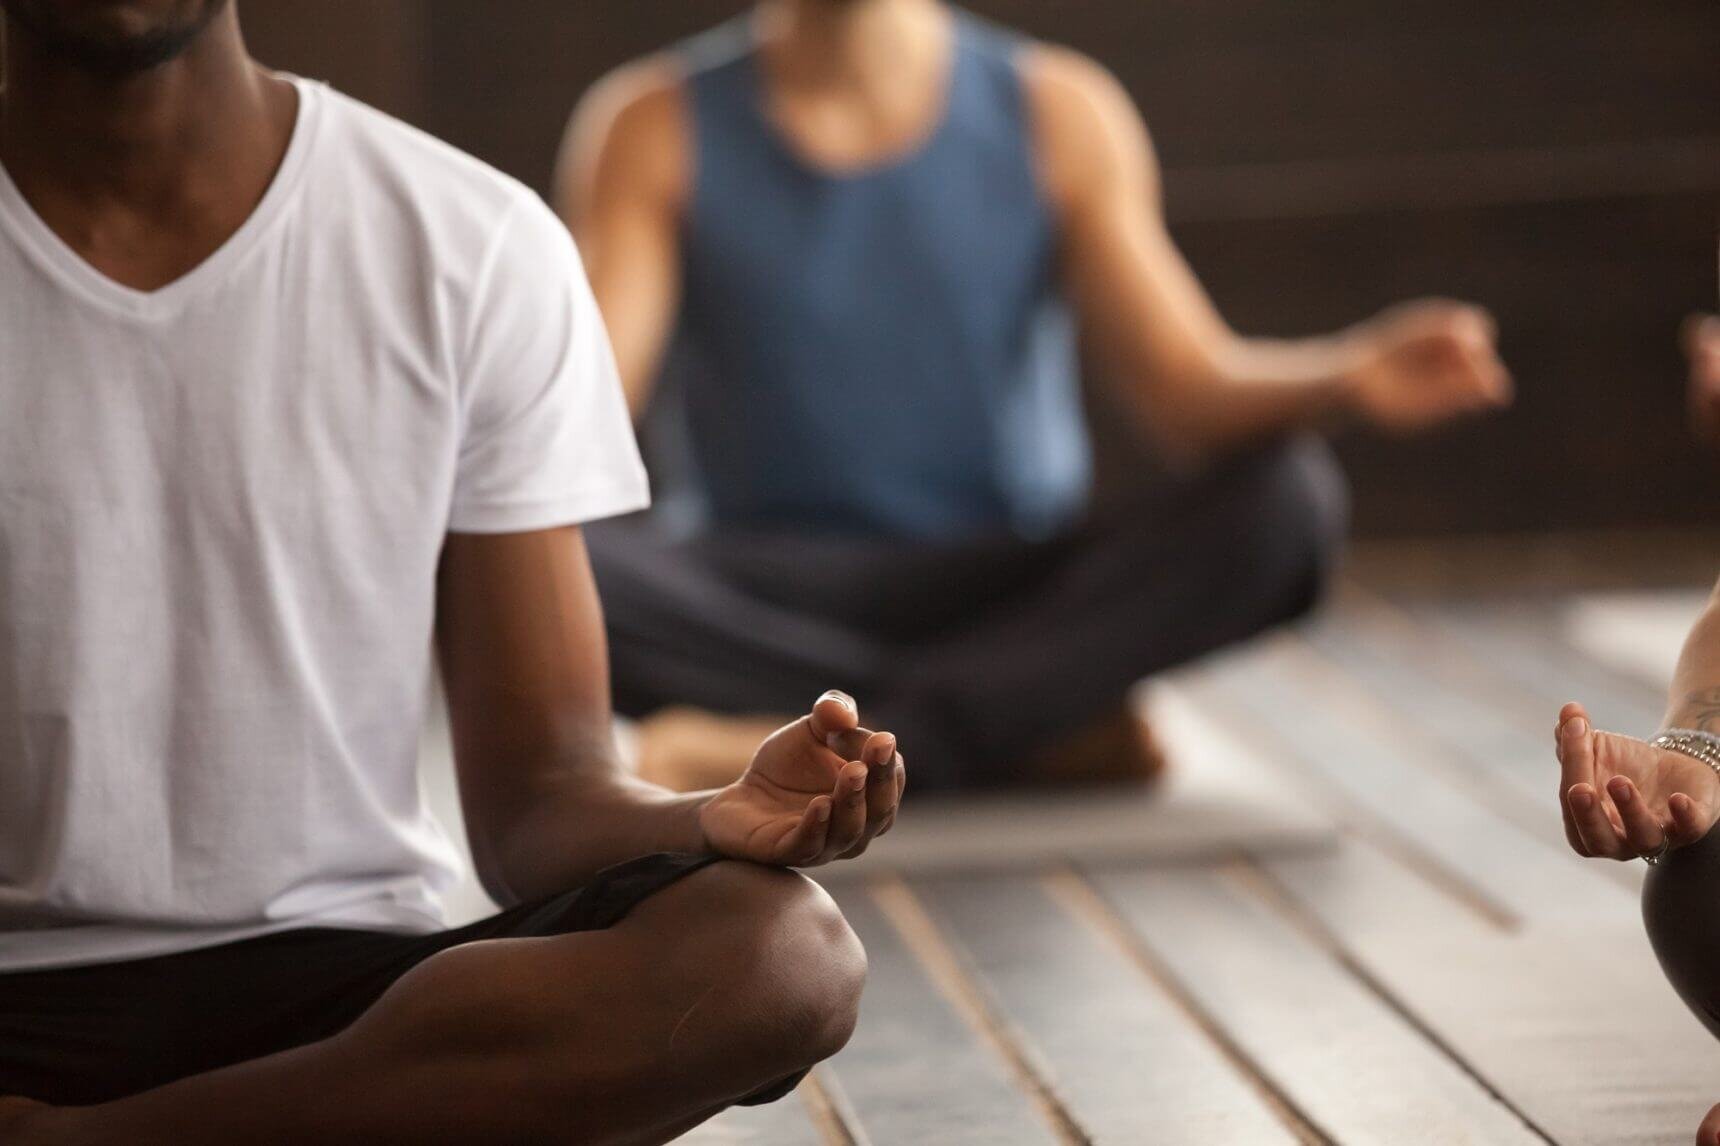 Study: Yoga helps generalized anxiety disorder